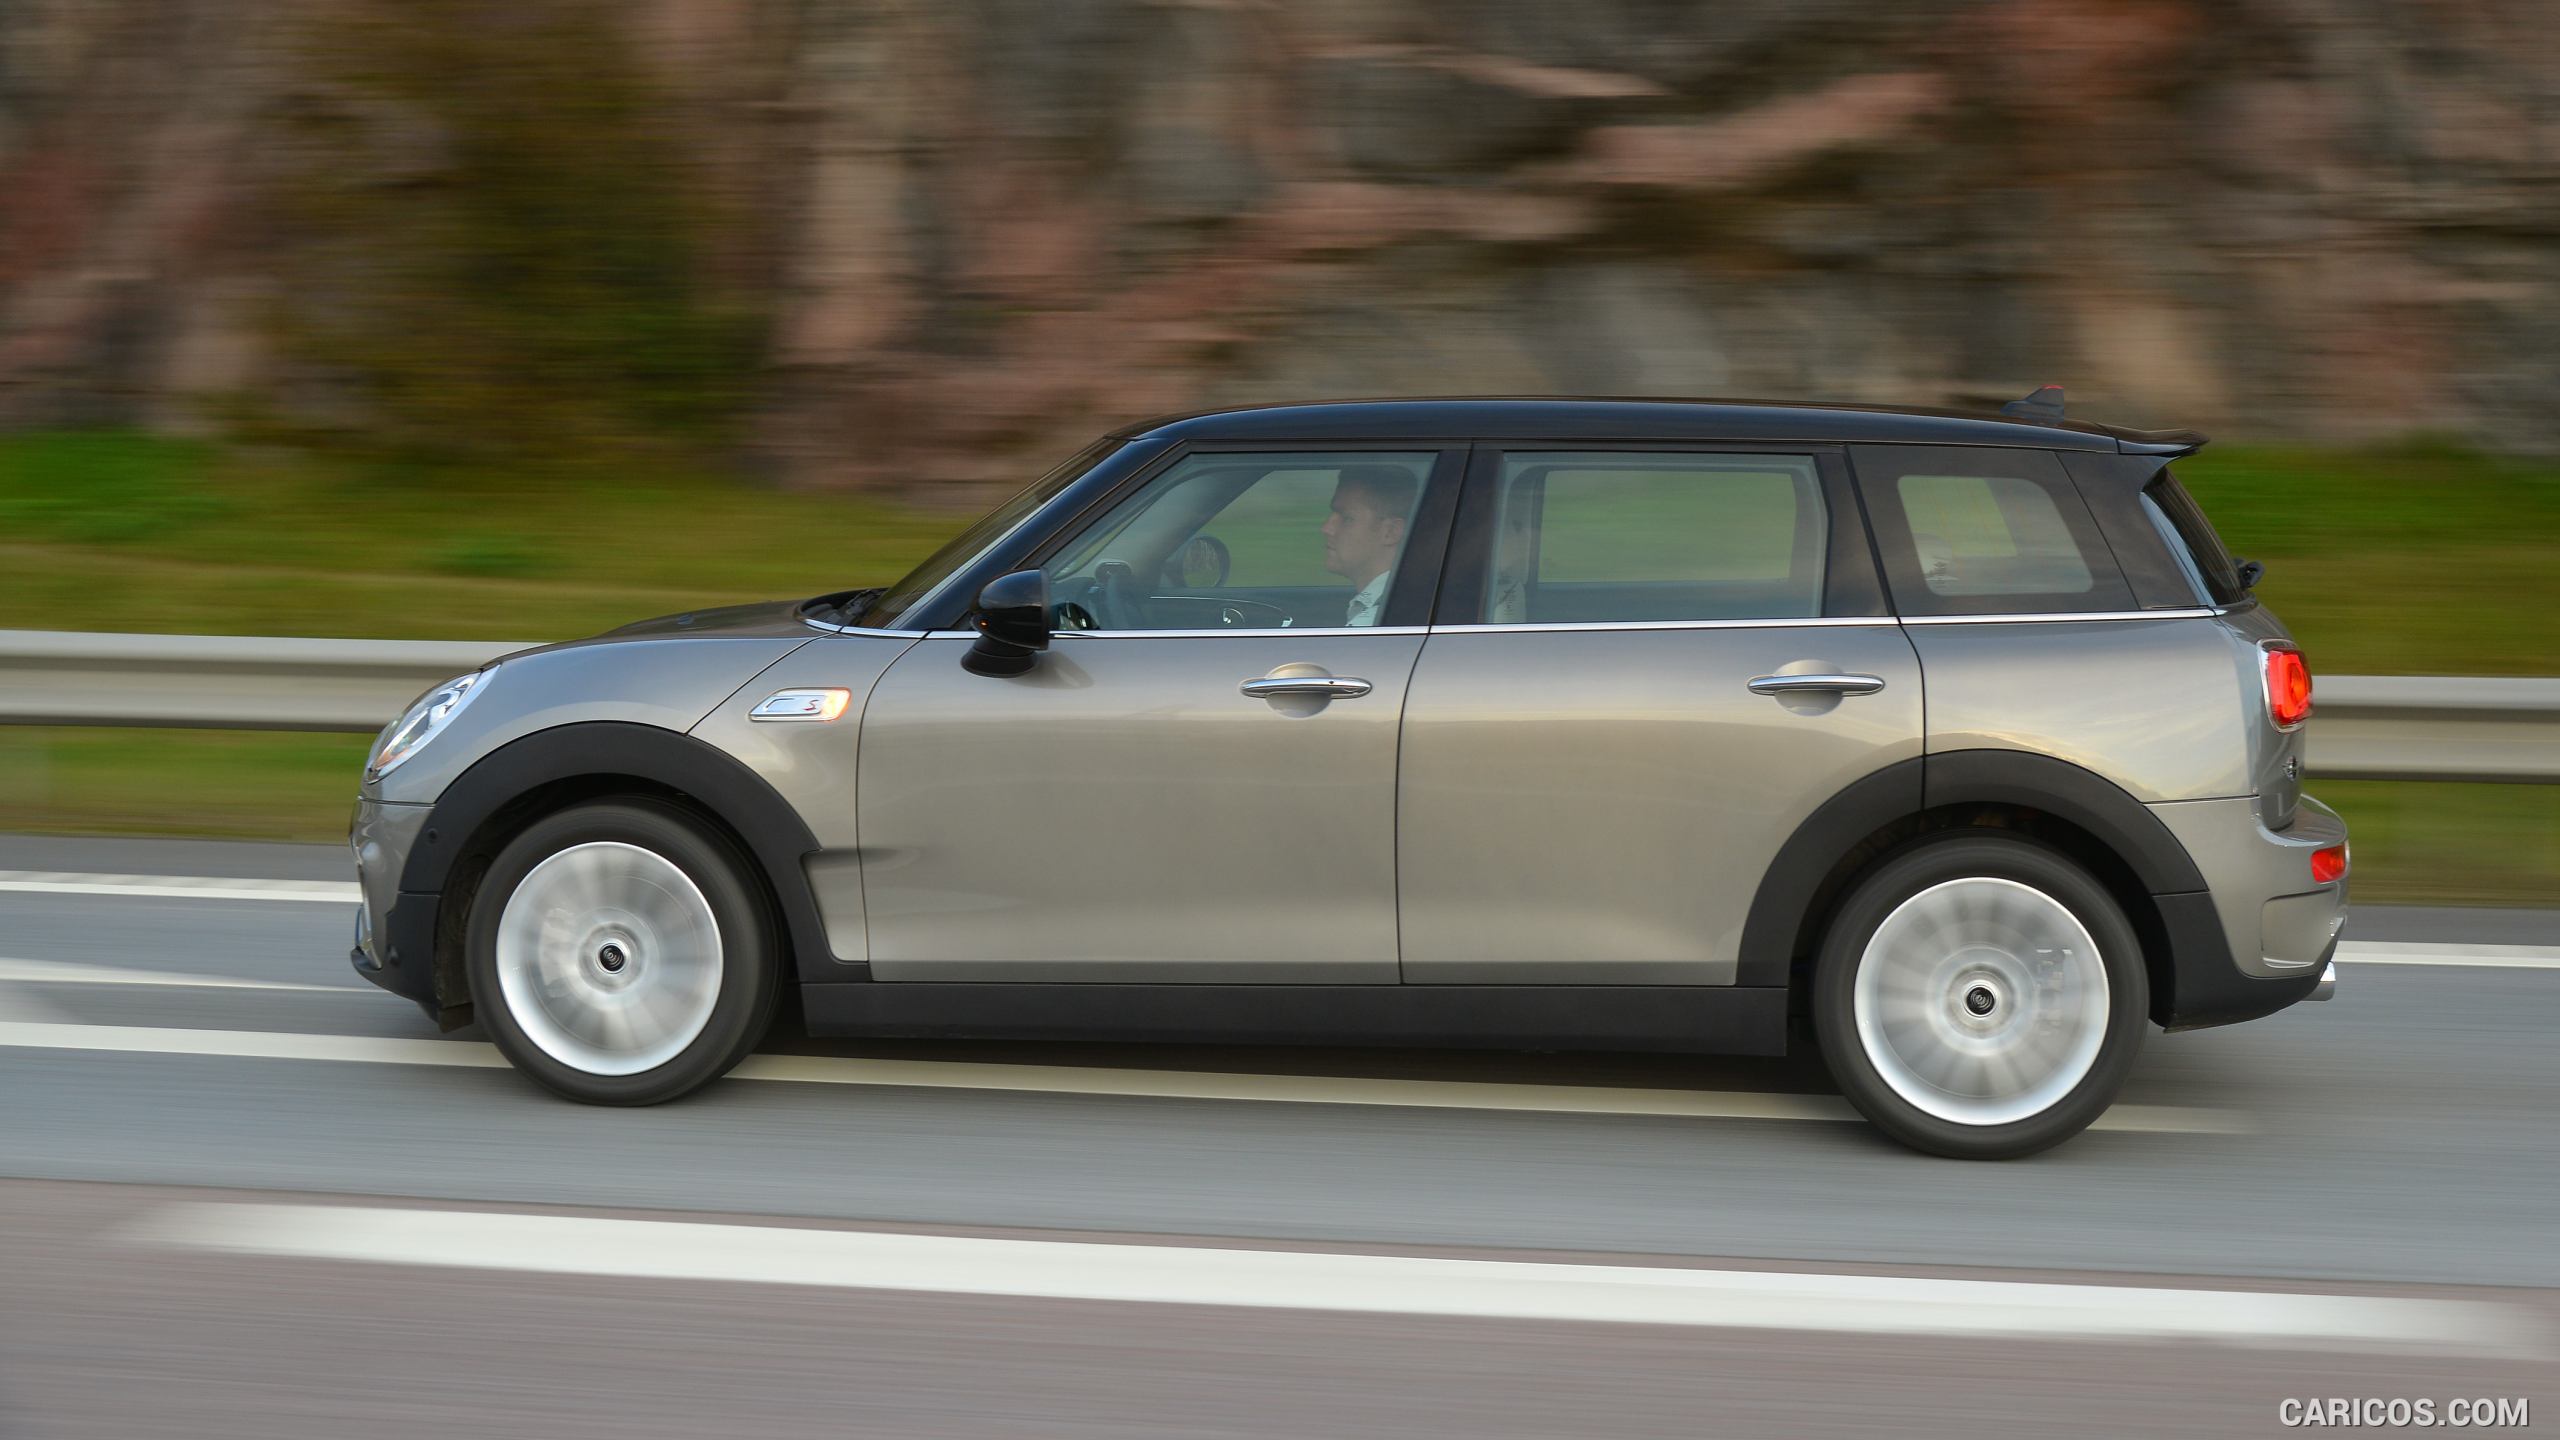 2016 MINI Cooper S Clubman in Metallic Melting Silver - Side, #112 of 380